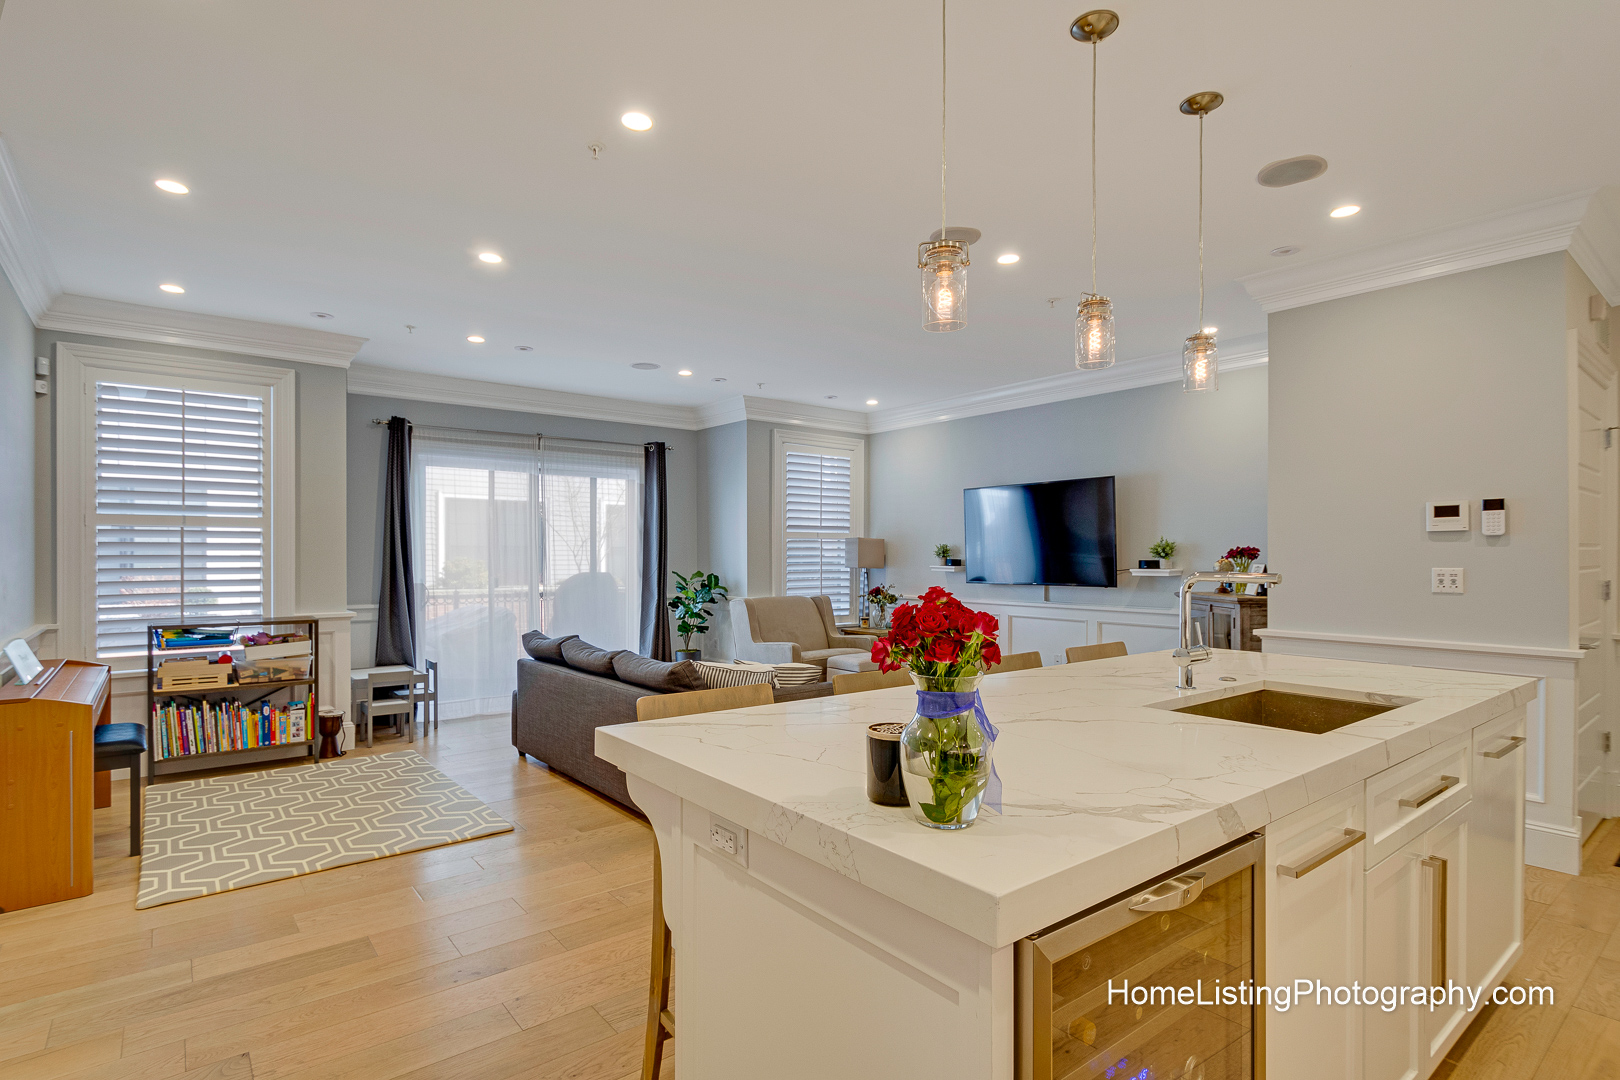 Thomas Adach - South Boston MA professional real estate photographer - 508-655-2225 Home Listing Photography